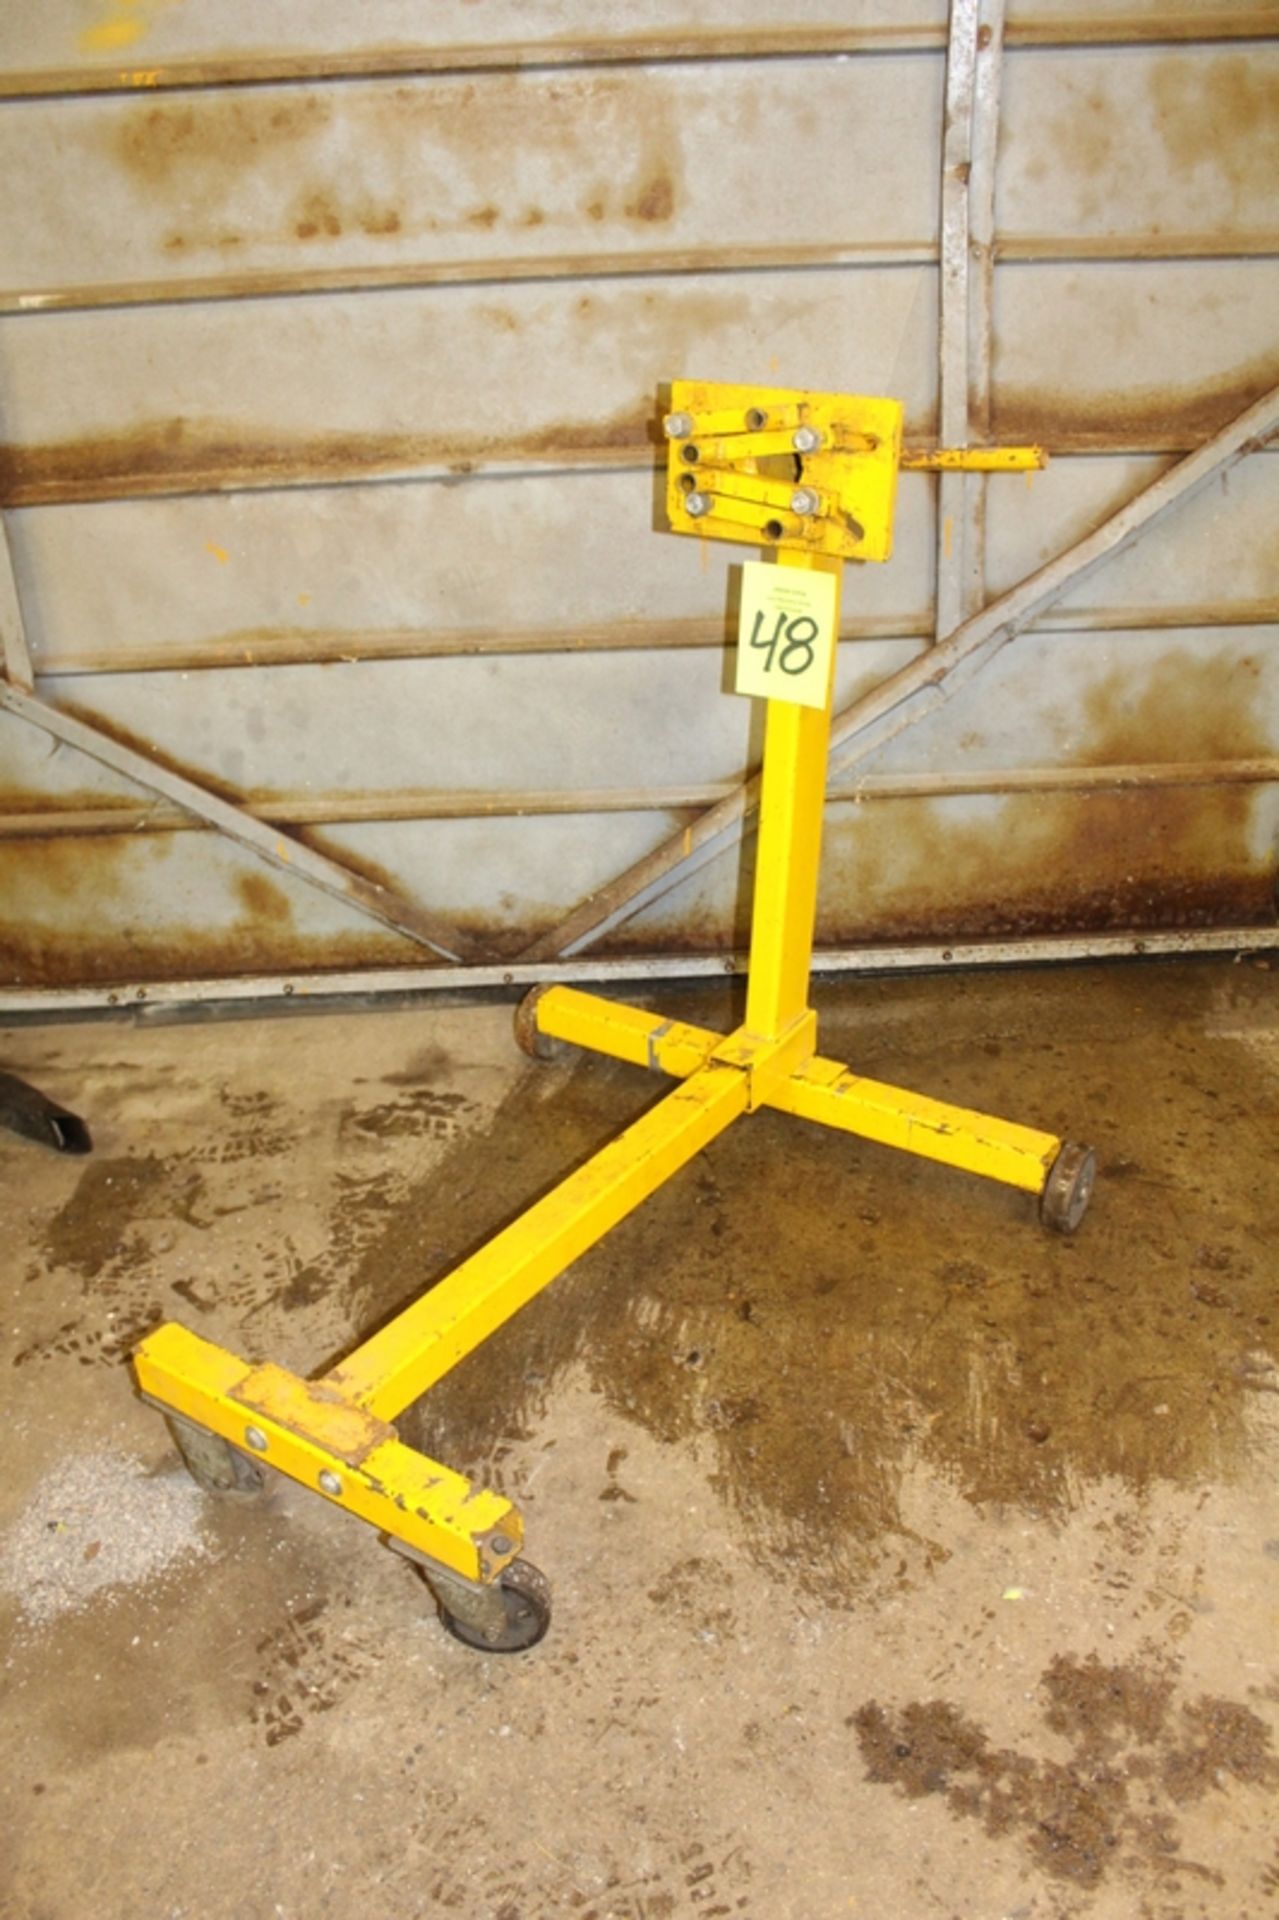 Wilmar Model W41025 1,000 Lb. Capacity Portable Engine Stand - Image 2 of 3